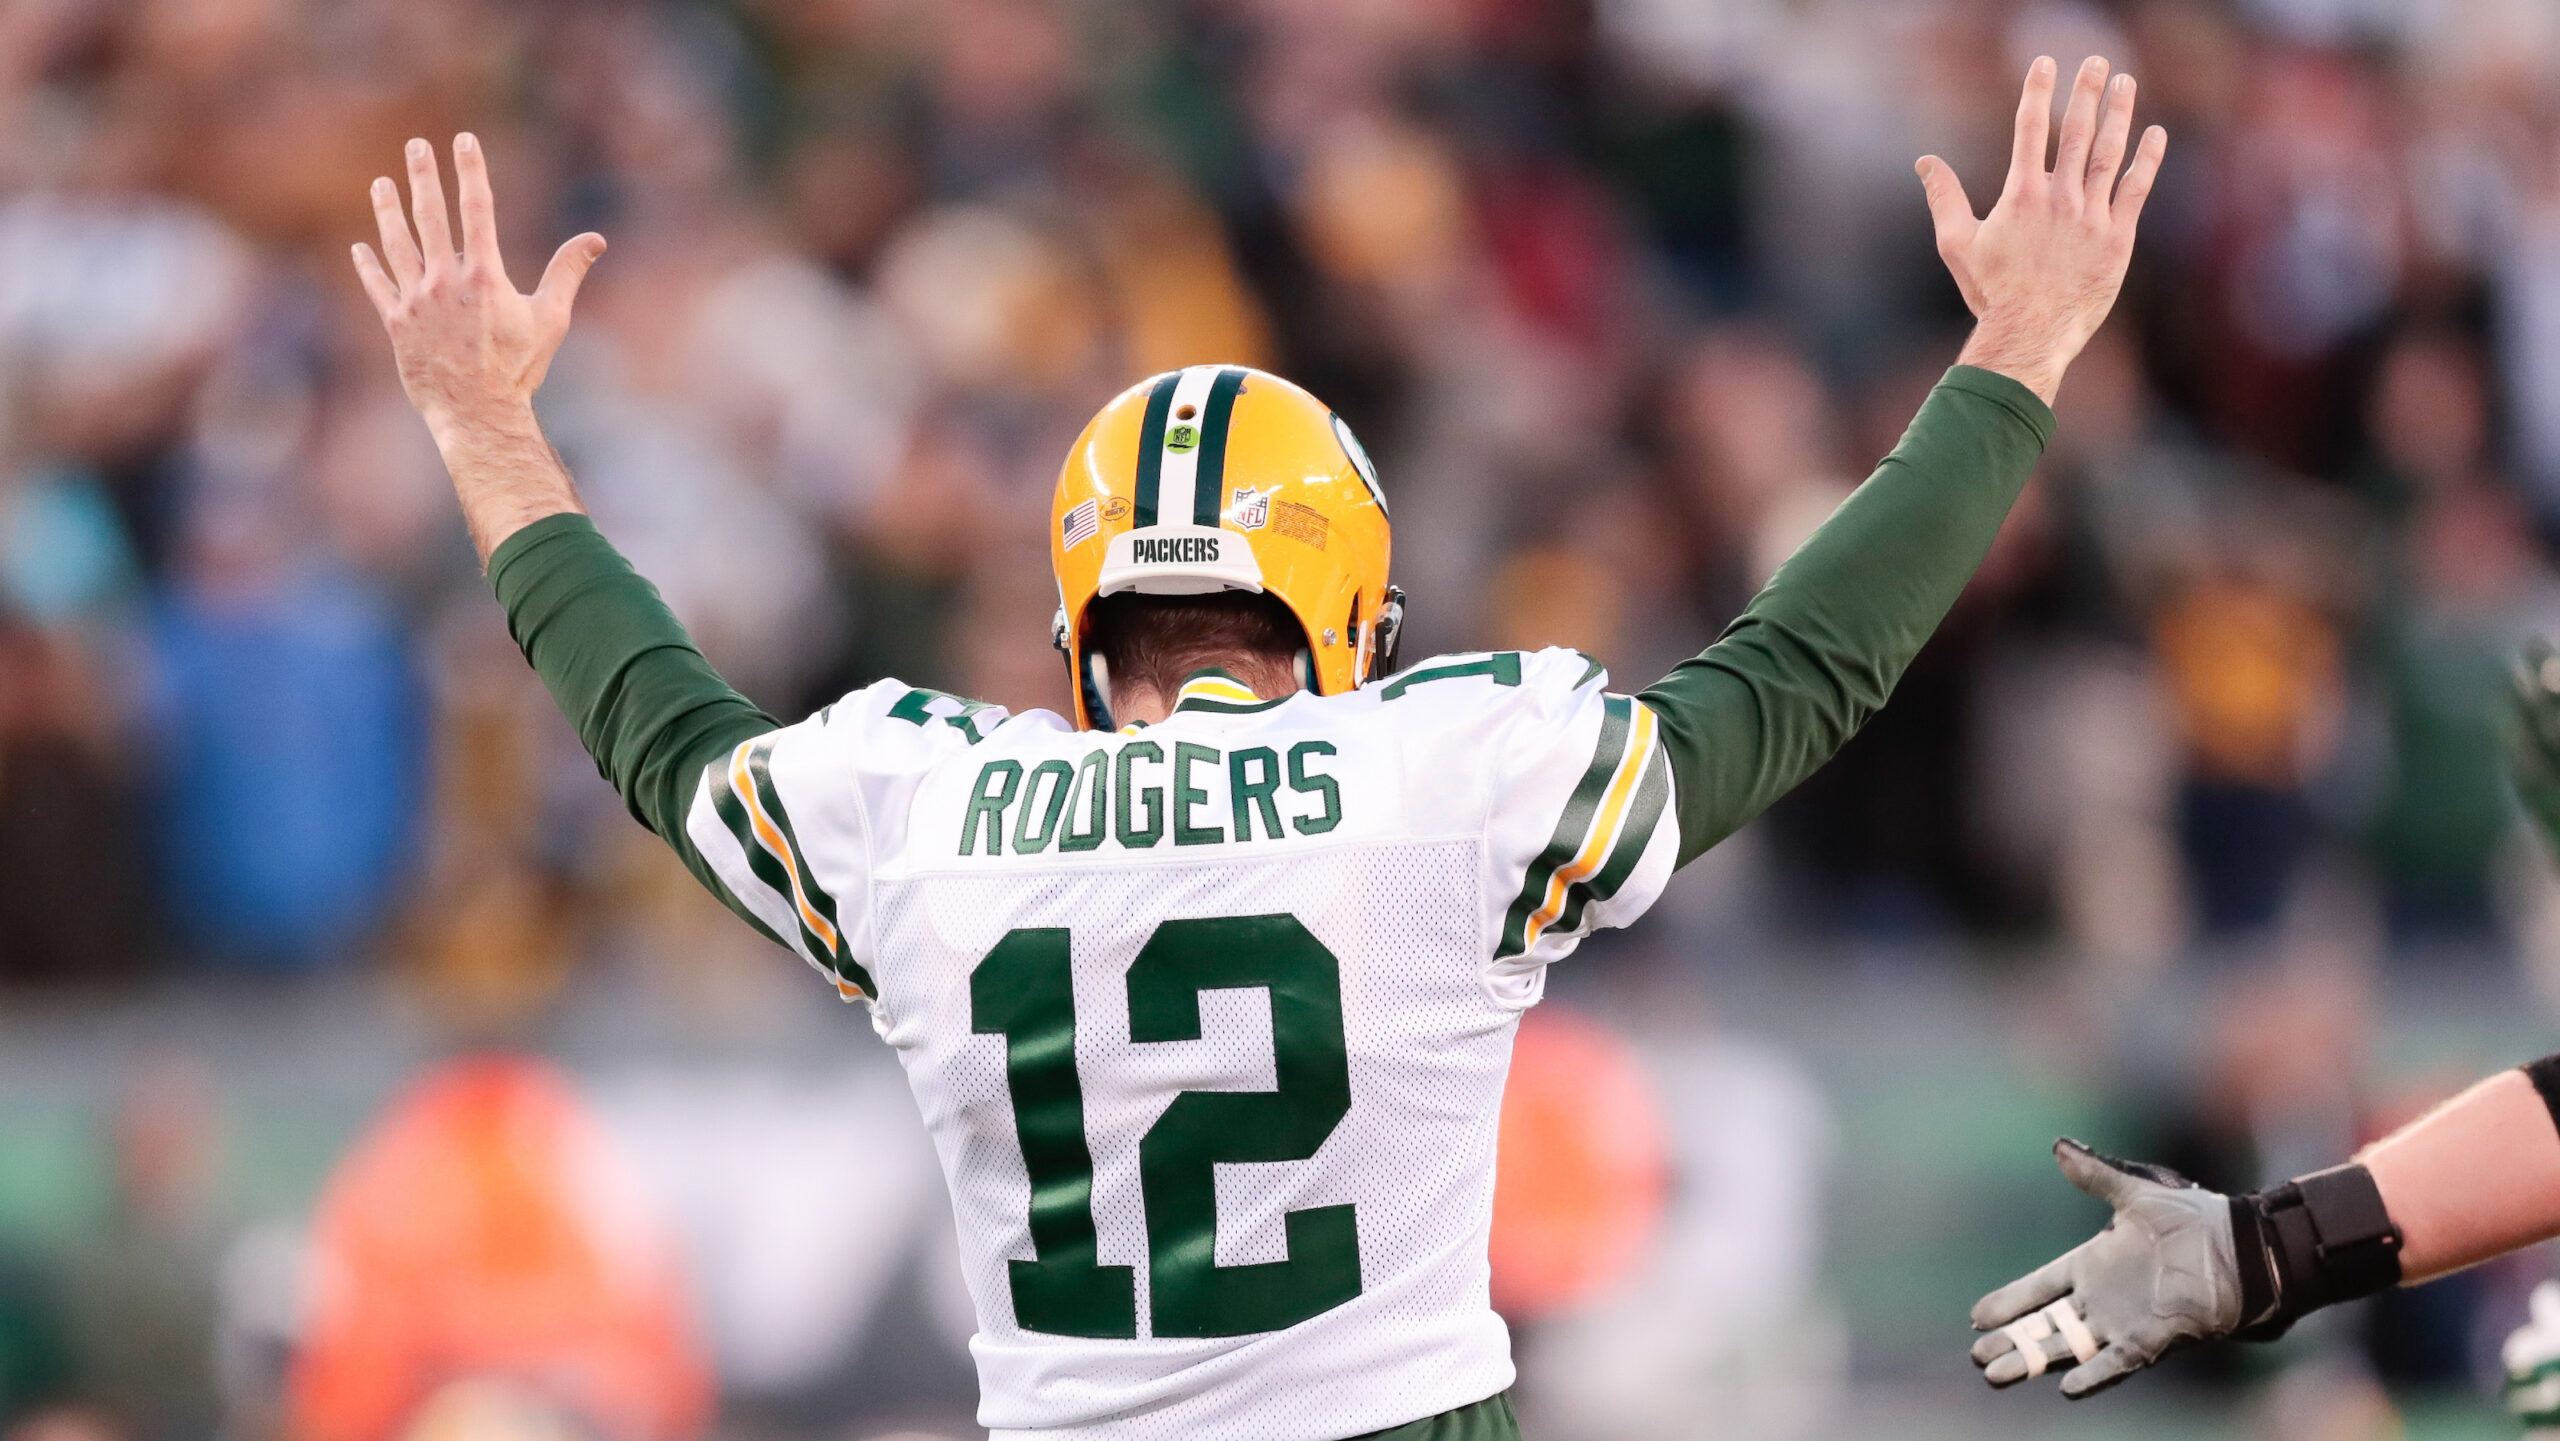 Up for Debate: Does Aaron Rodgers Make Jets a Title Contender?